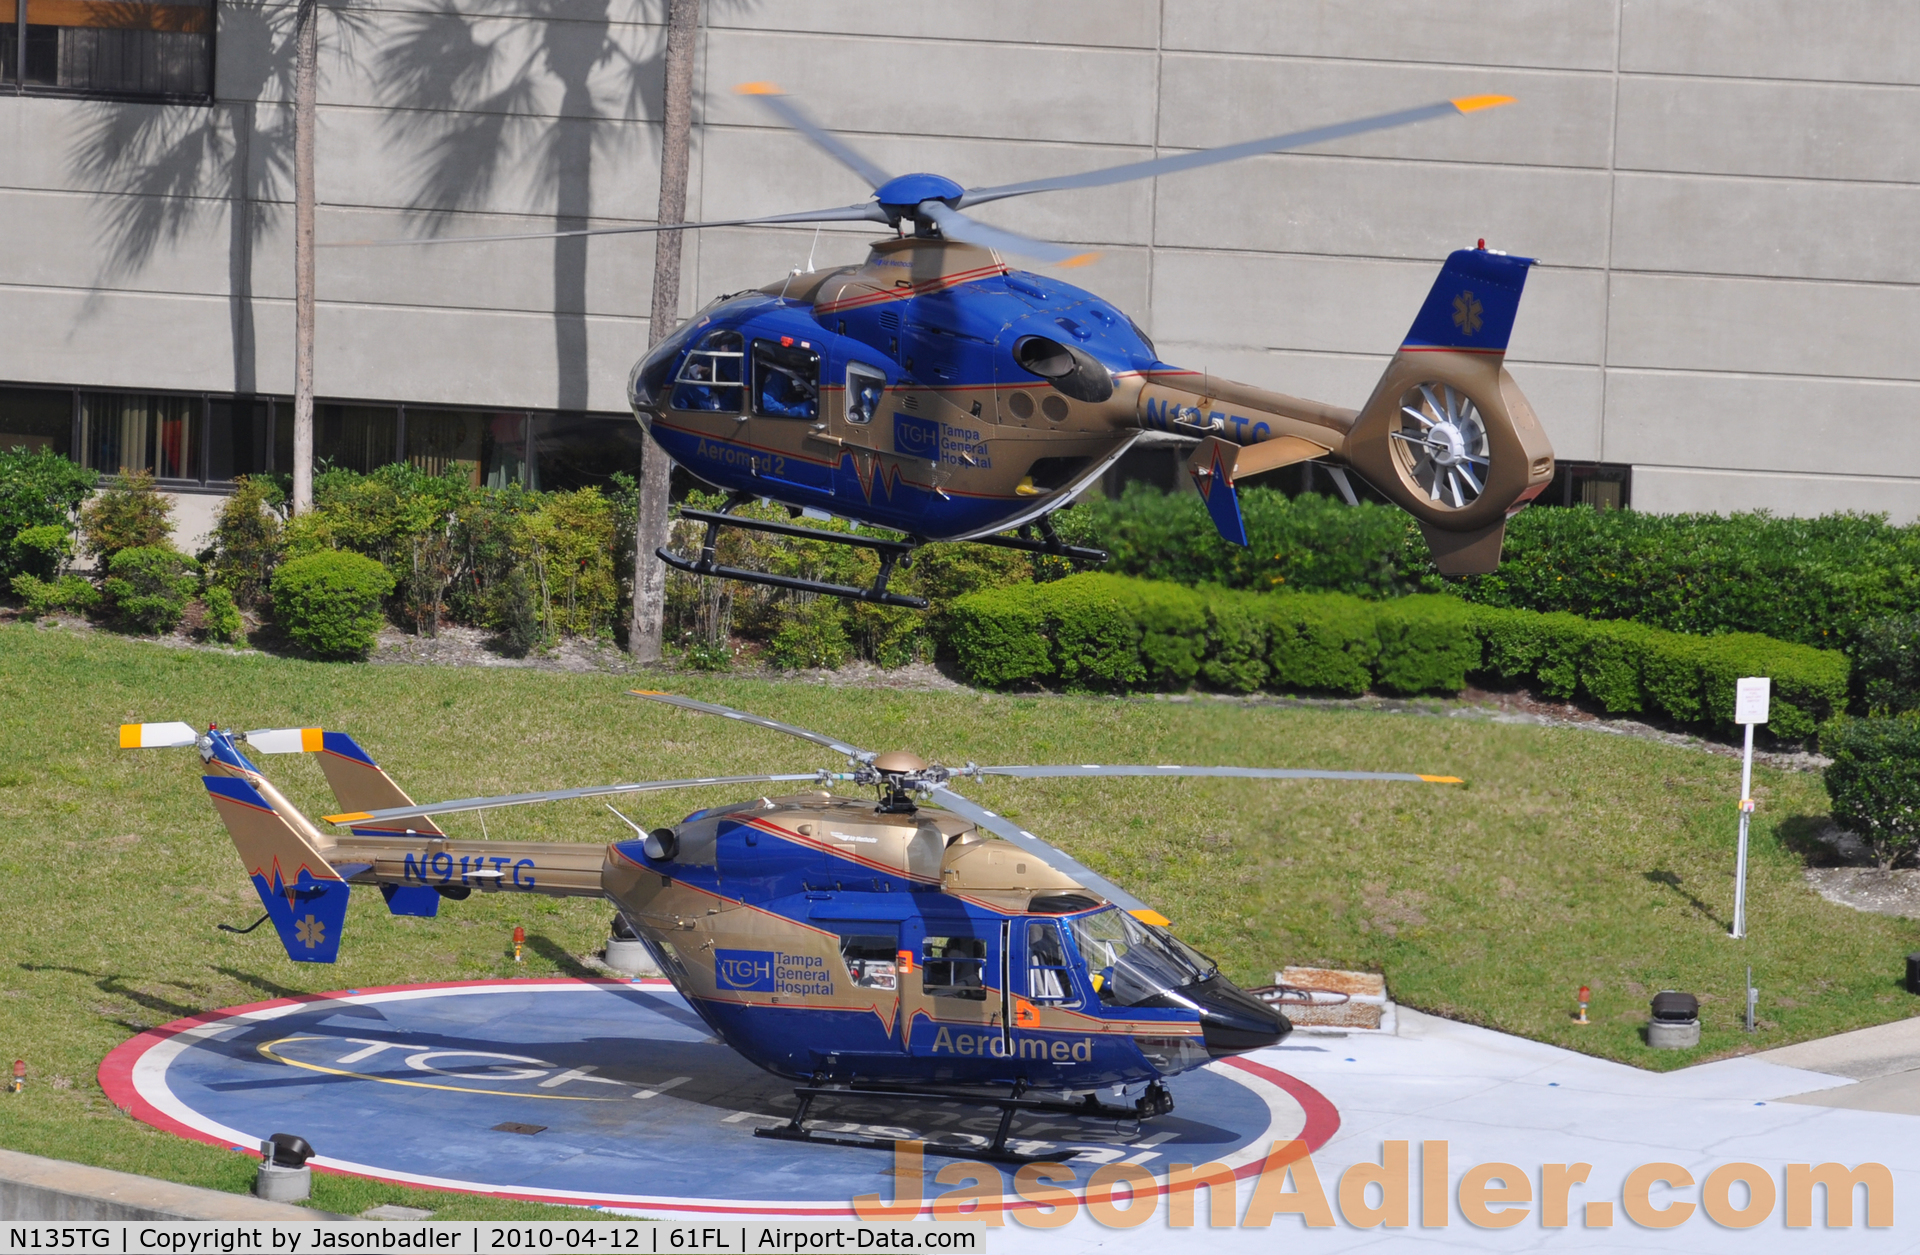 N135TG, 2003 Eurocopter EC-135T-2 C/N 0298, A quick shot i took of the two TGH helicopters.